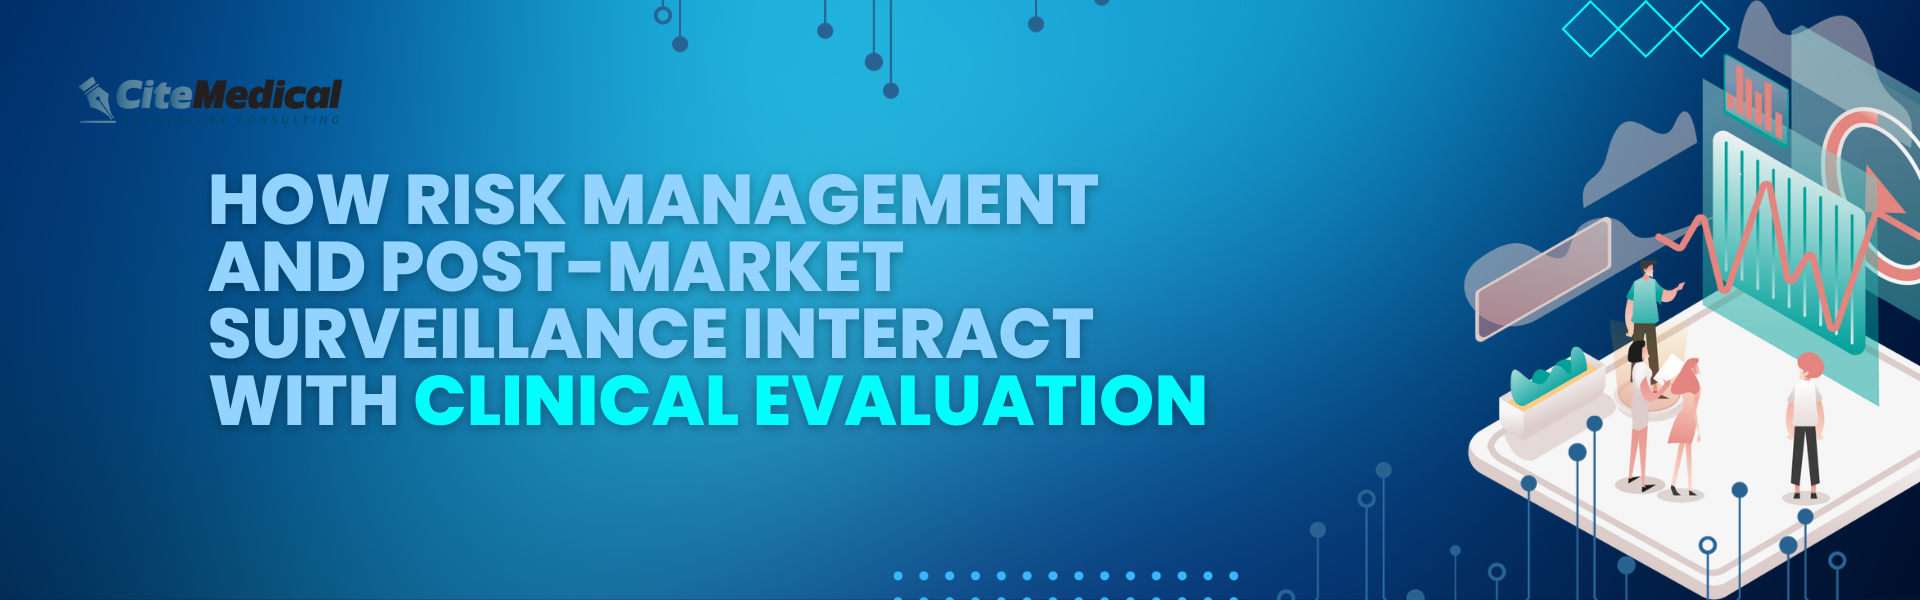 How Risk Management and Post-Market Surveillance Interact with Clinical Evaluation